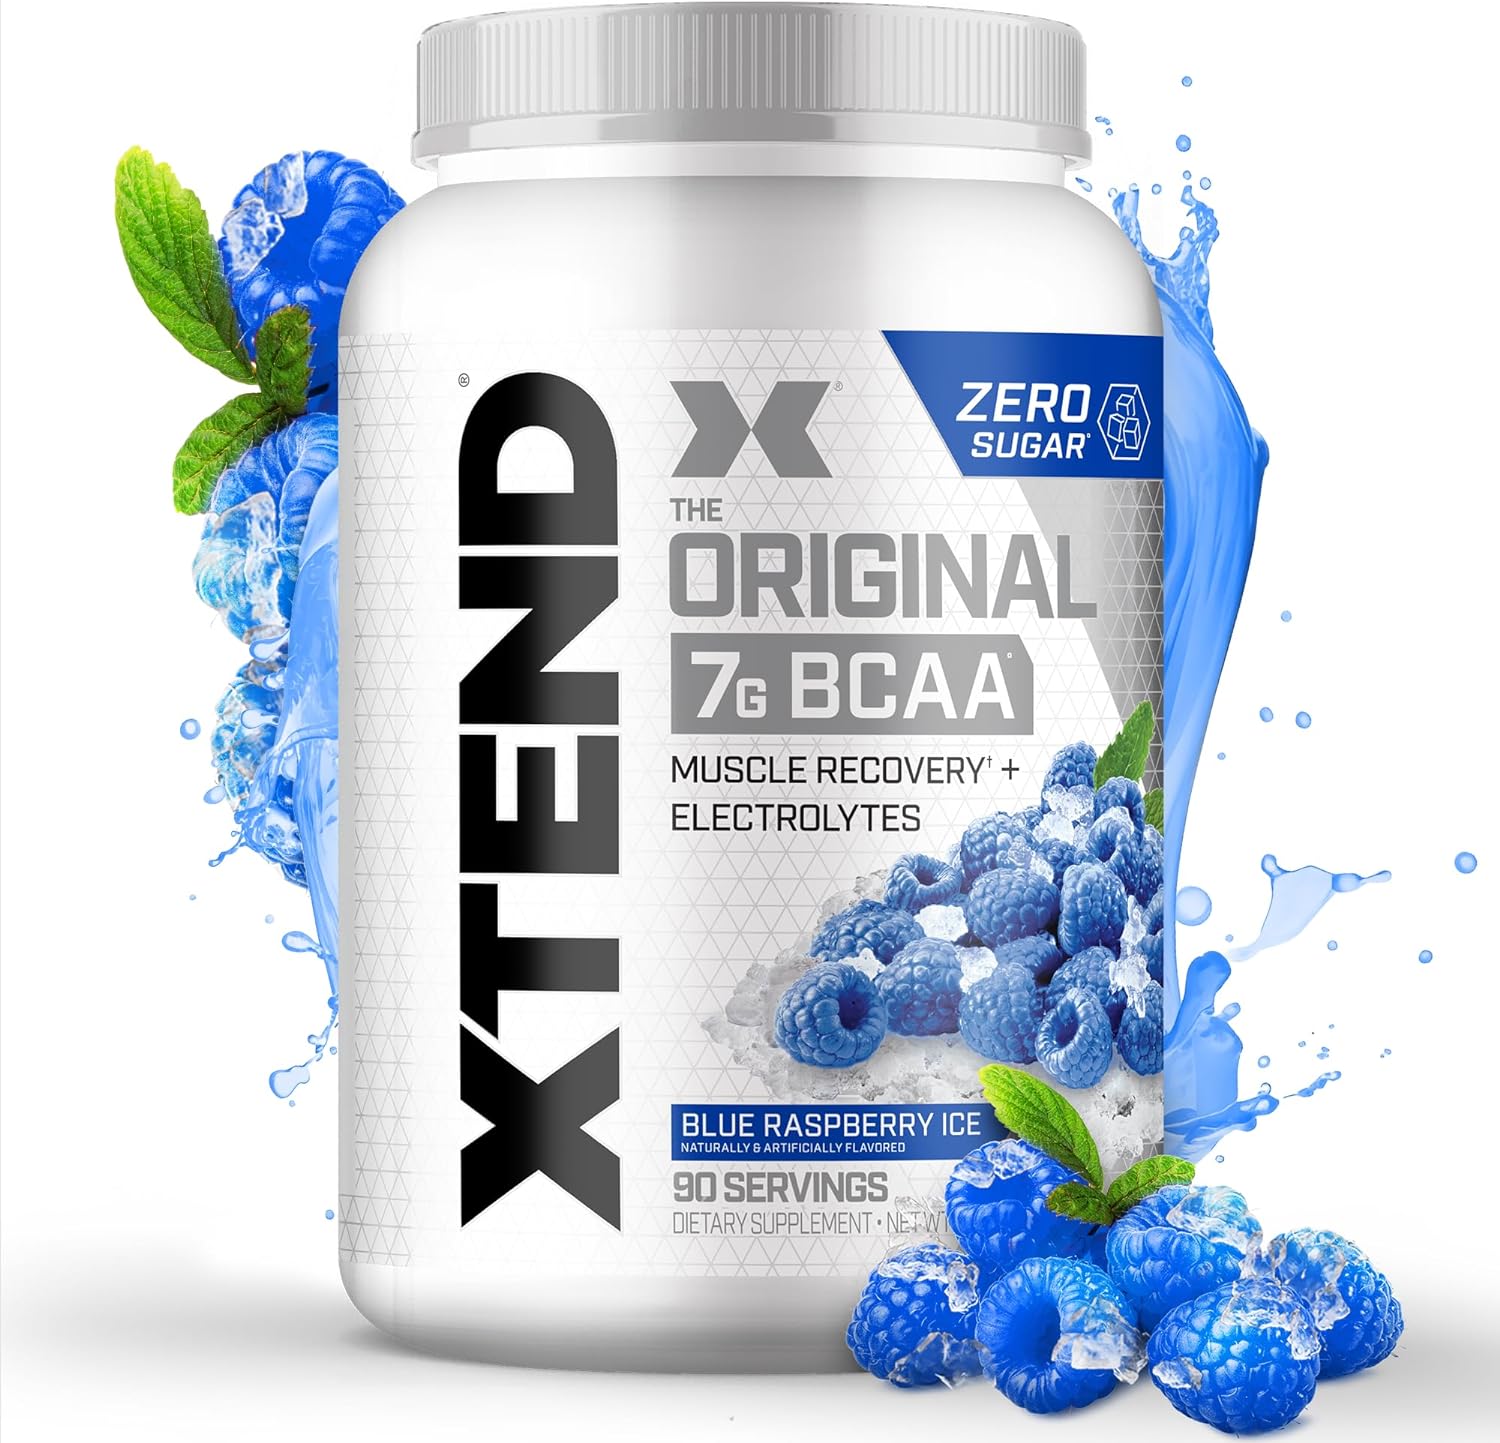 XTEND Original BCAA Sugar Free Post Workout Muscle Recovery Drink!